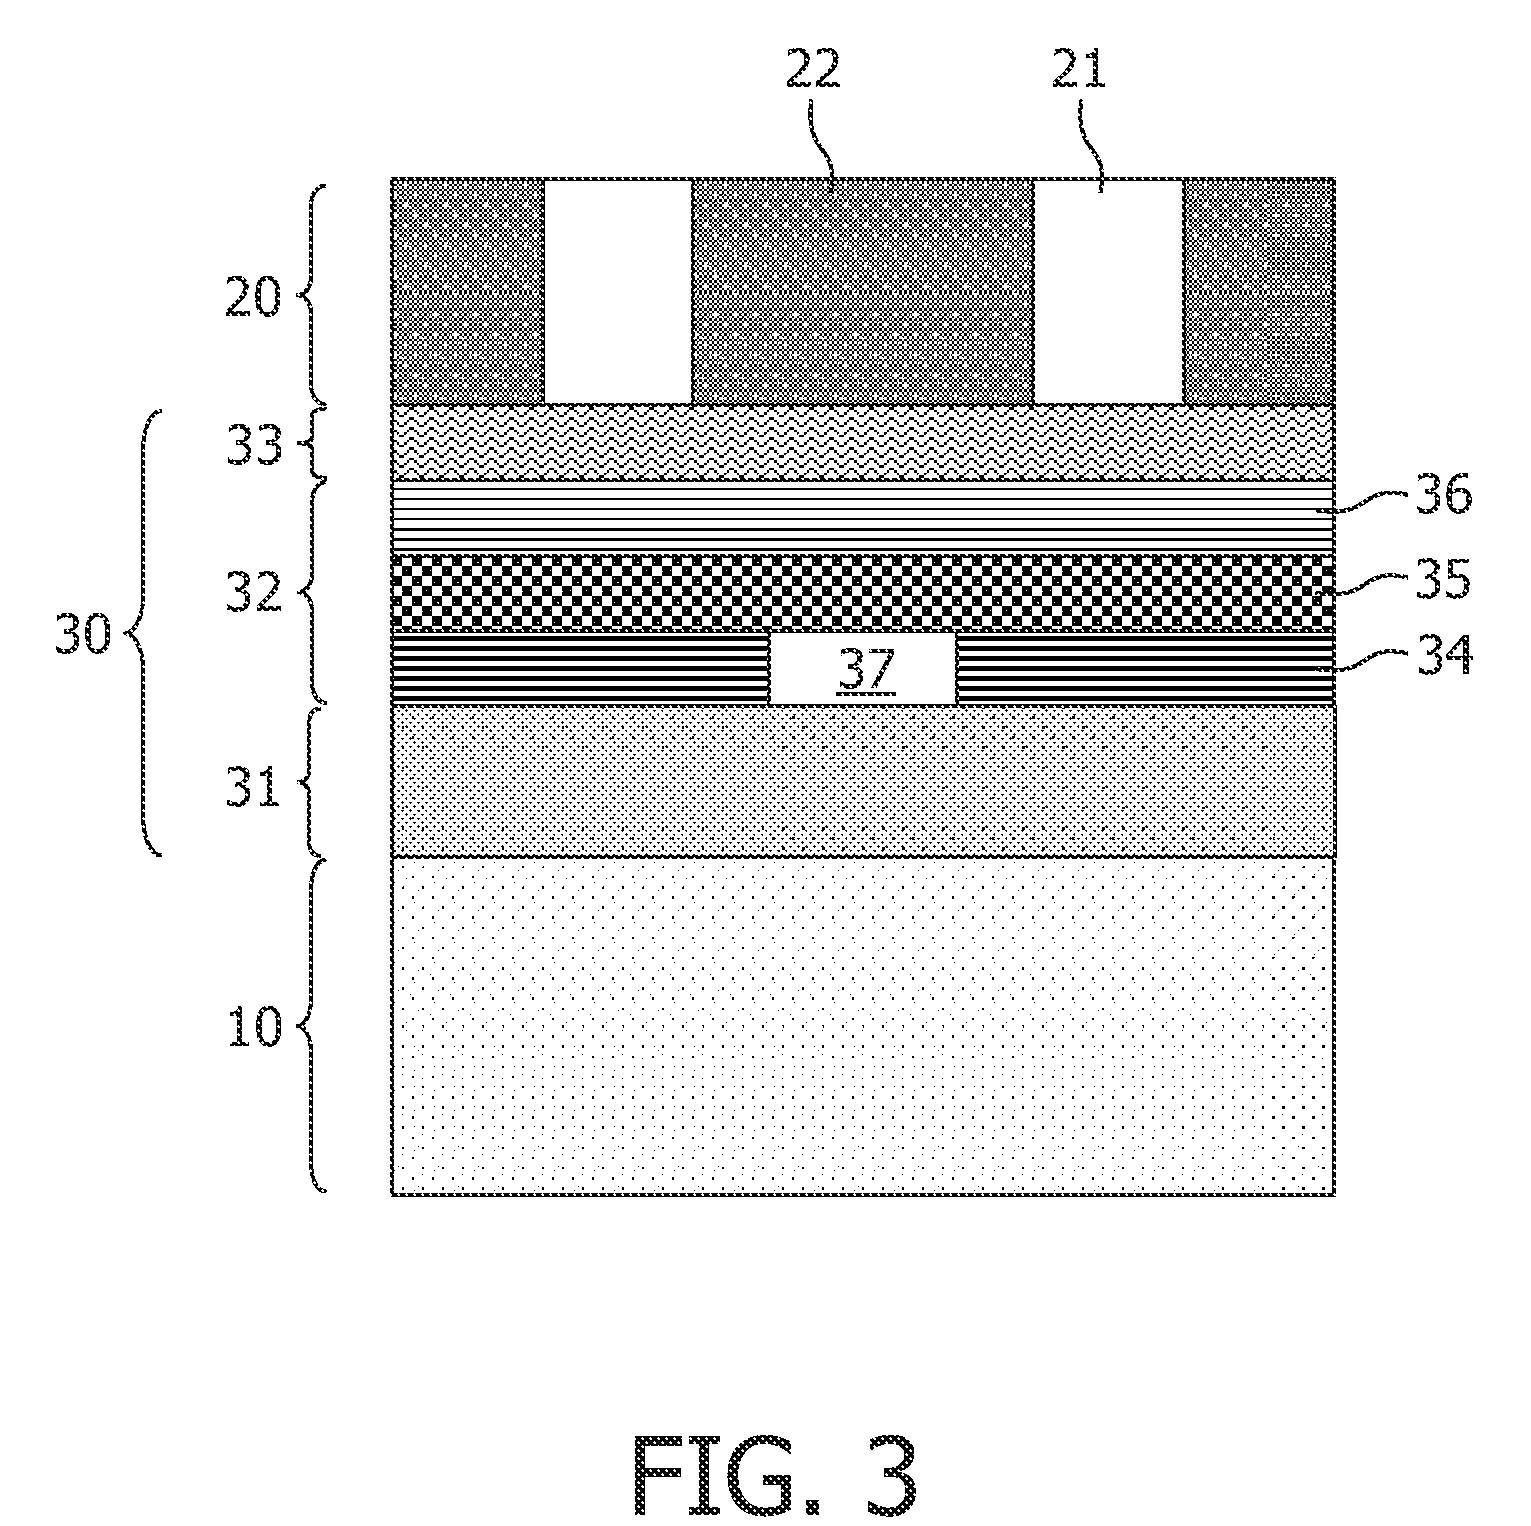 Method for manufacturing a housing element having a decorative covering and a grip layer